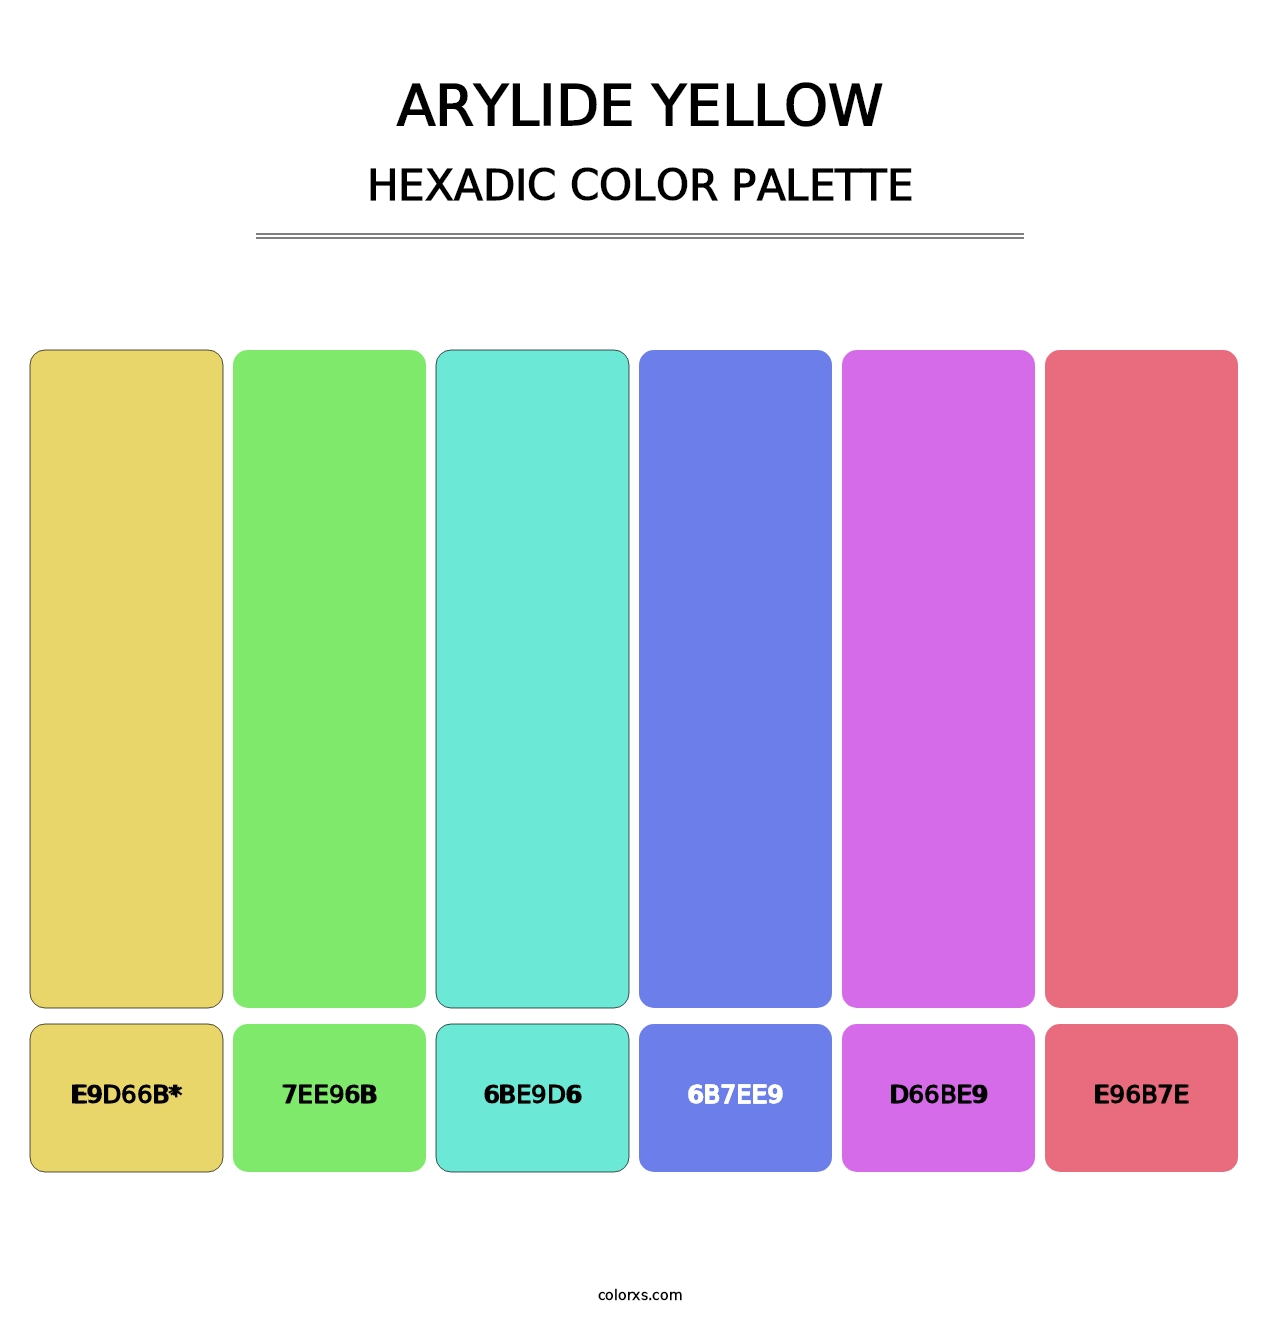 Arylide Yellow - Hexadic Color Palette